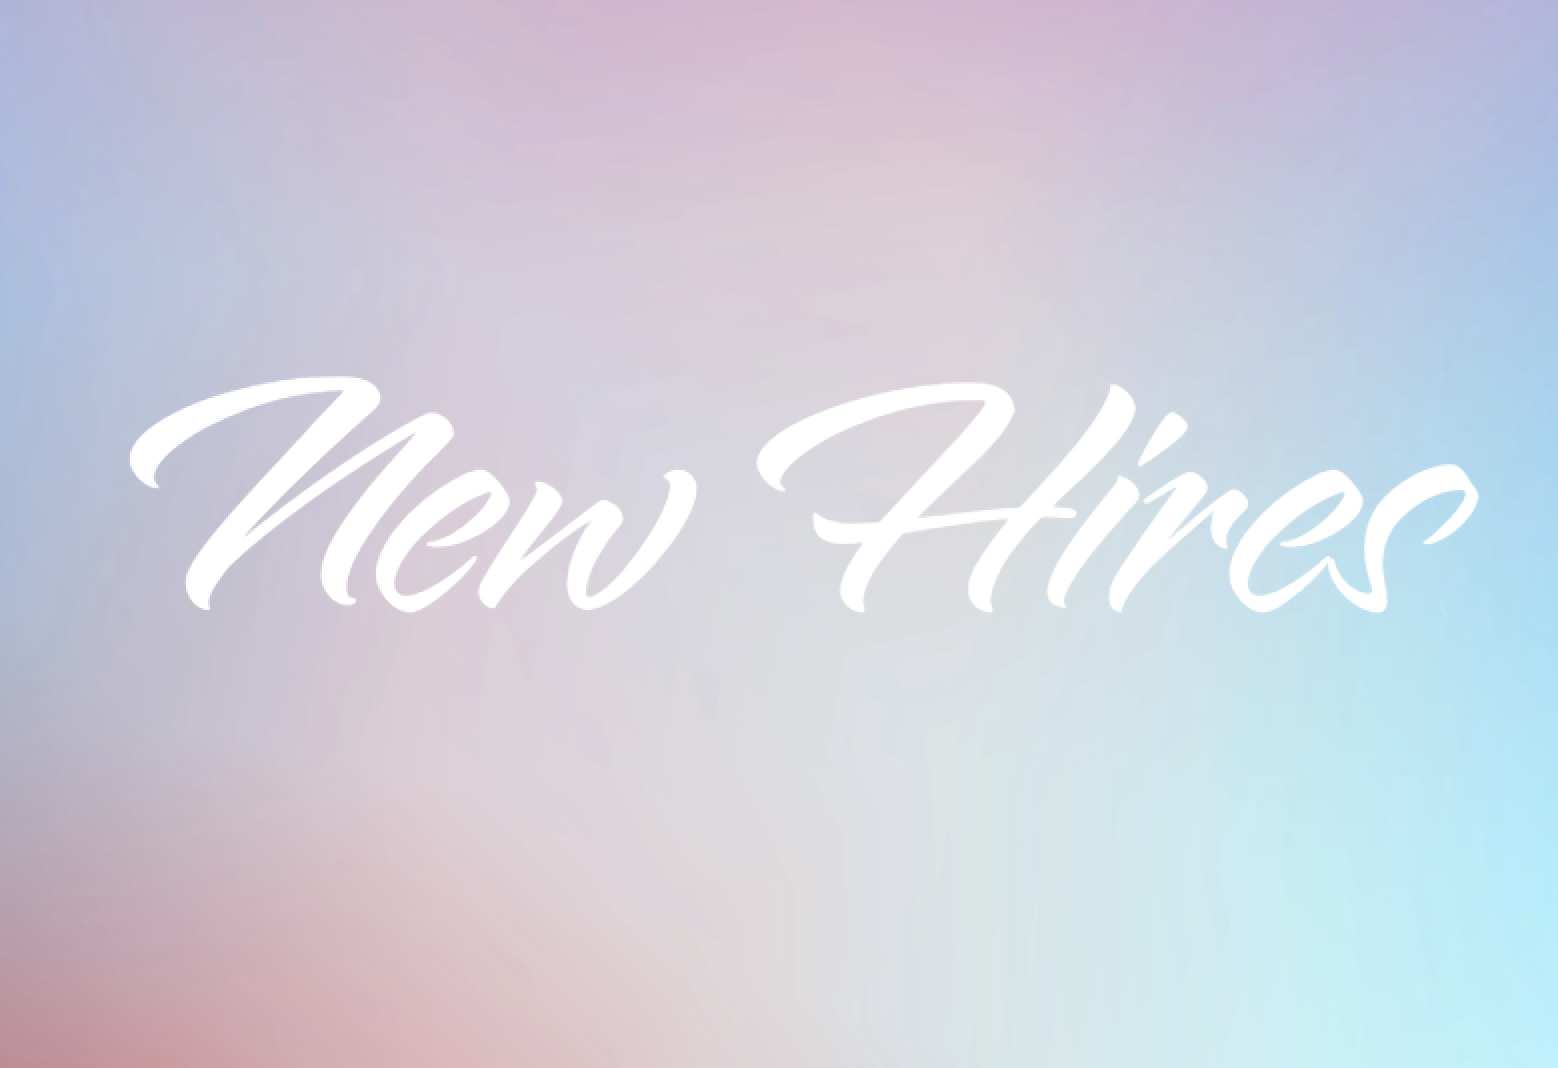 graphic of white text over a pink and blue background that says "New Hires"